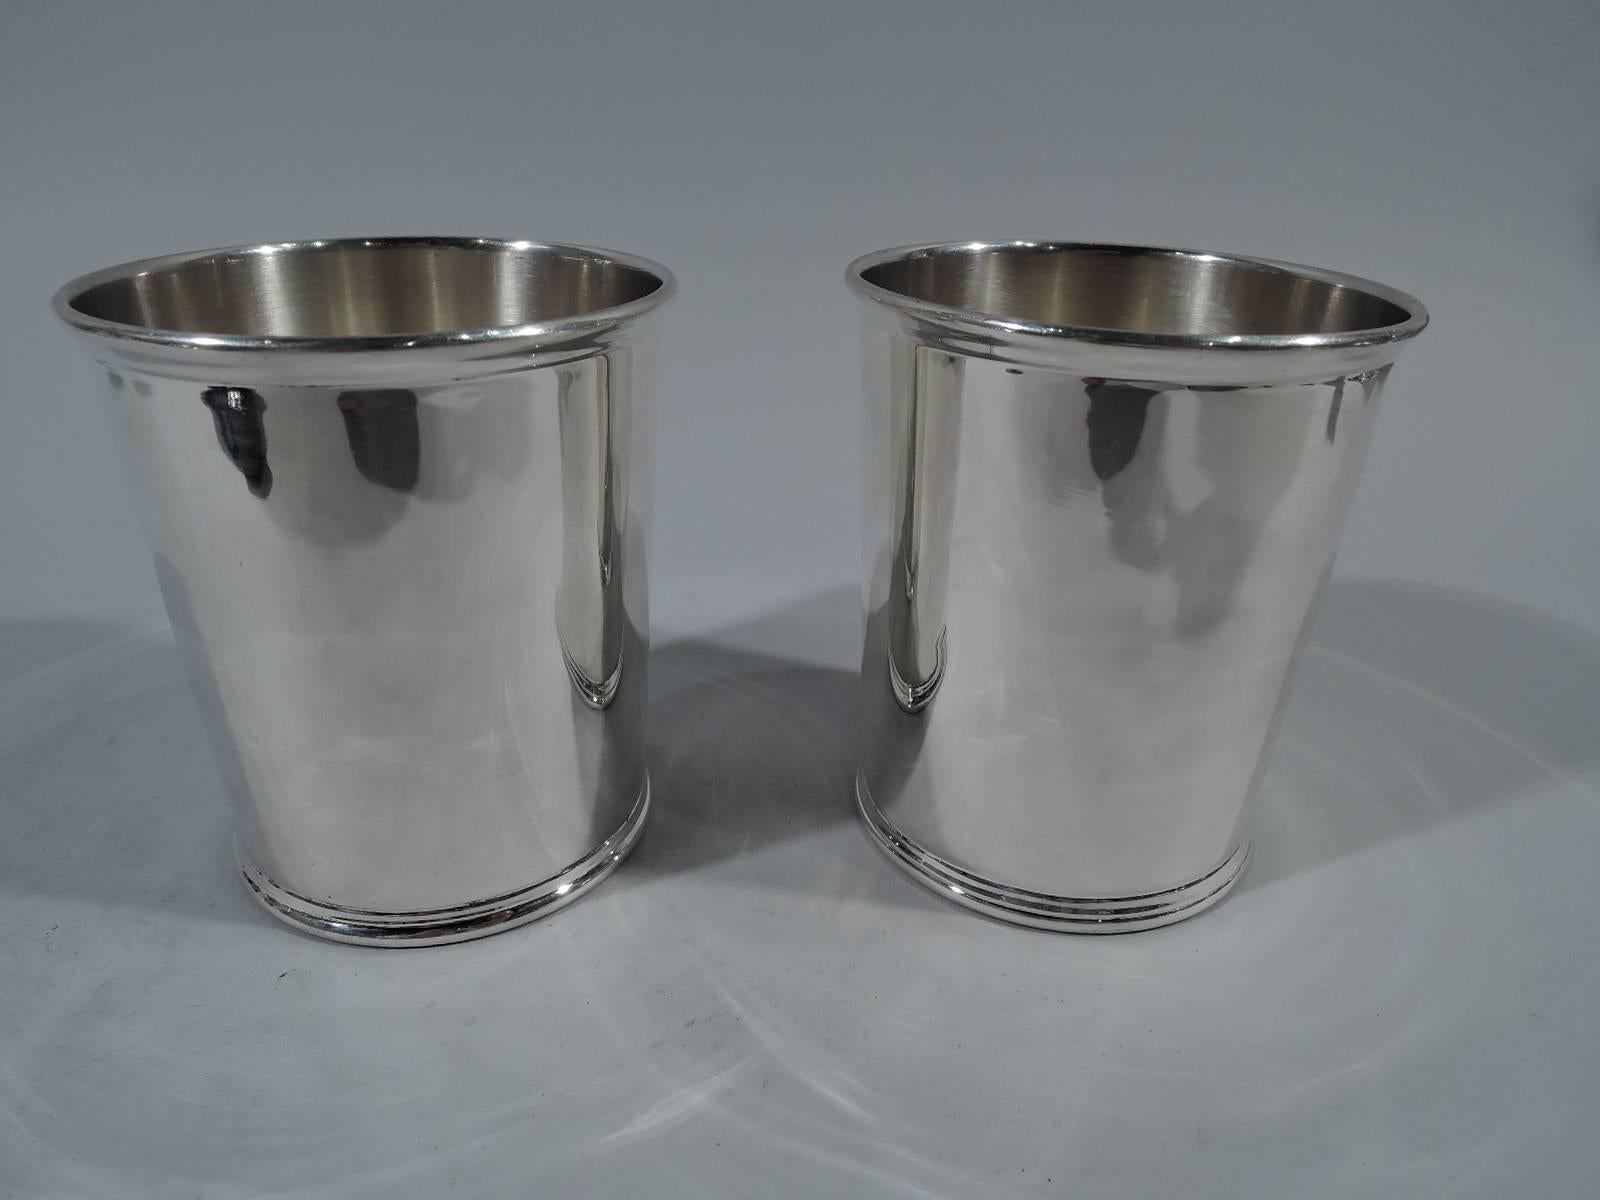 Pair of American sterling silver mint julep cups. Each: Traditional form with straight and tapering sides and molded rims. Hallmarked “Sterling”. Good condition. Total weight: 9.2 troy ounces.